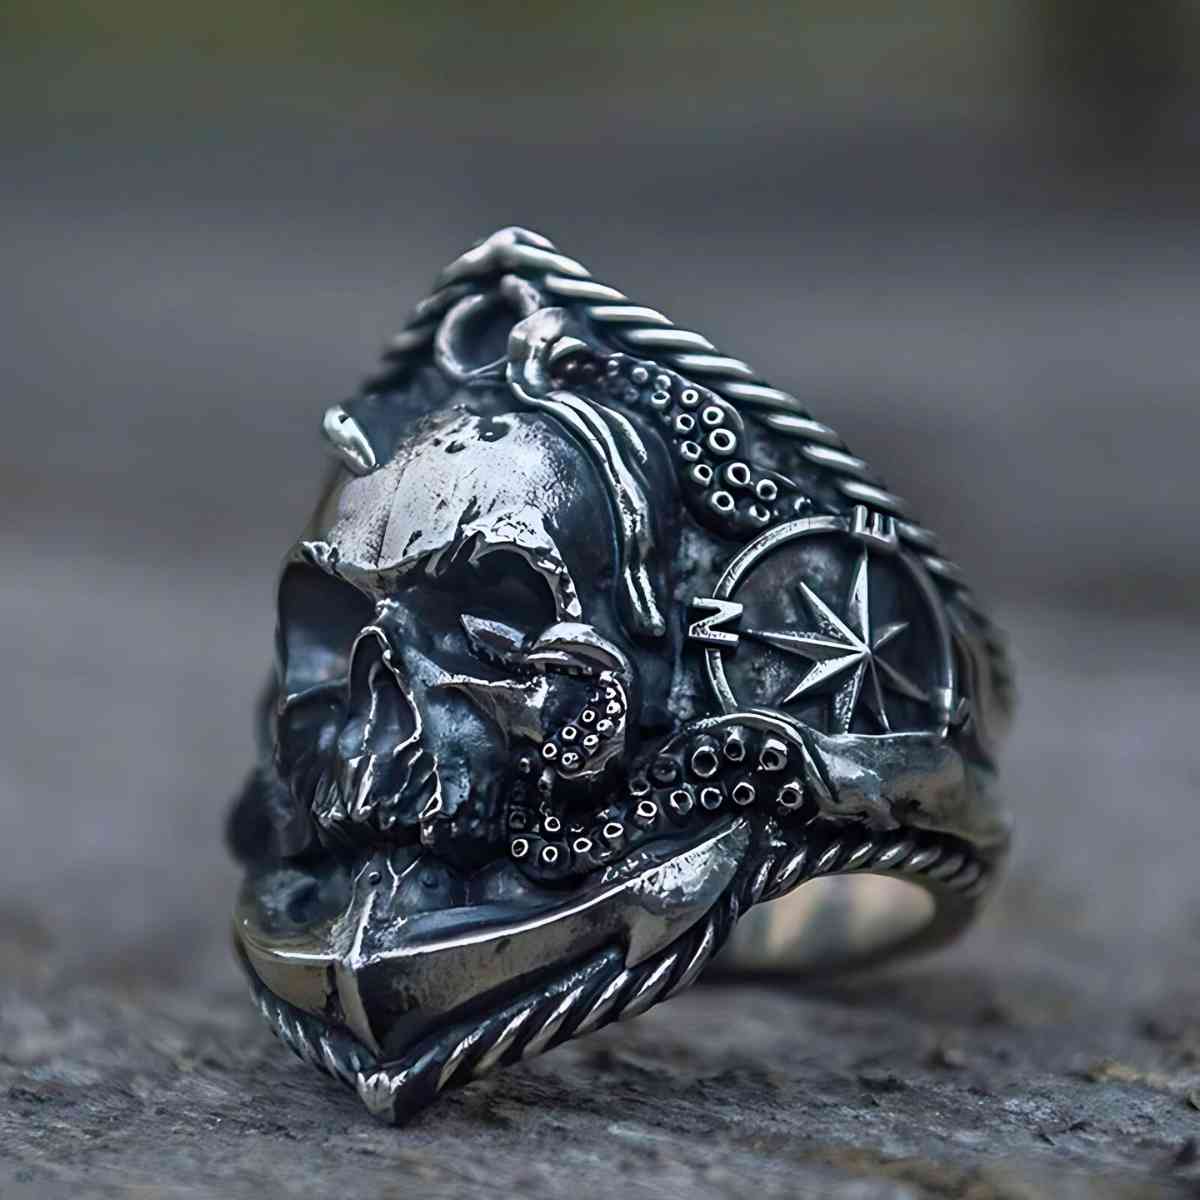 Skull Pirate Ring Stainless Steel Xenos Jewelry